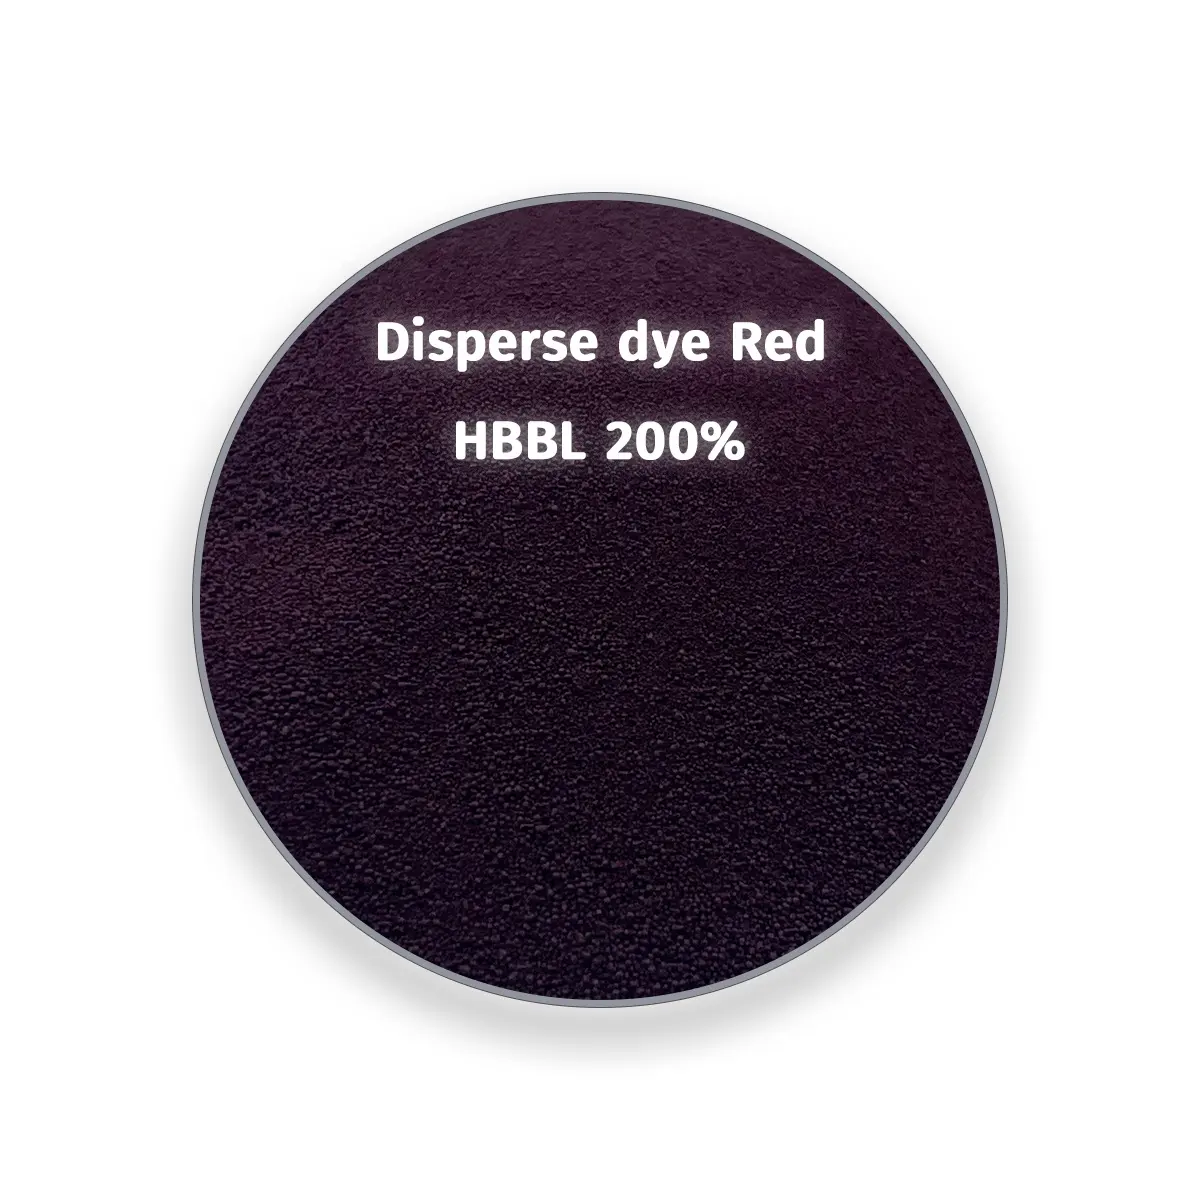 Disperse dye Can be customized and purchased Price concessions RedHBBL200% Used for dyeing polyester Garment dyes Nylon dyestuff